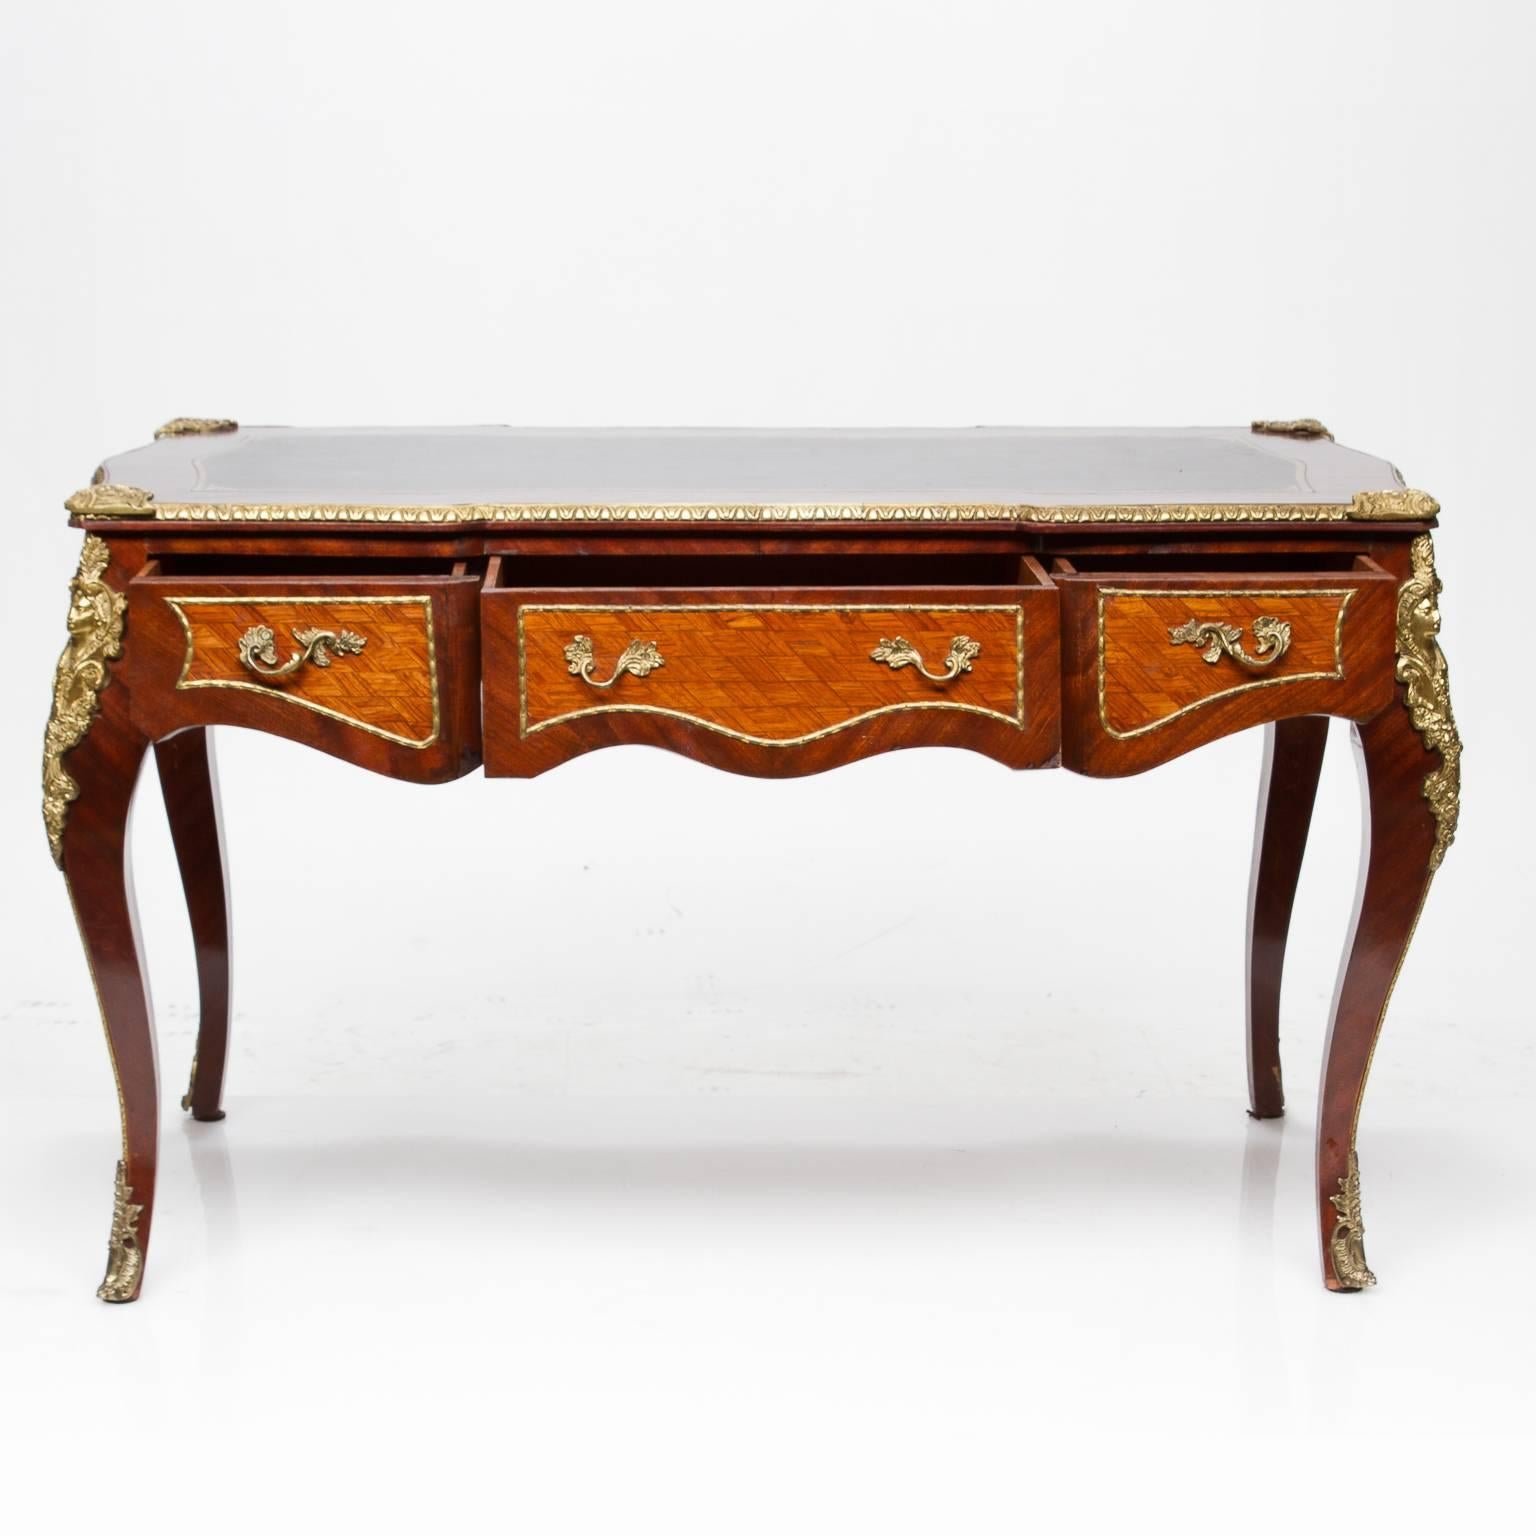 Vintage Louis XV style parquetry and straight grained inlaid bureau plat with superb bronze mounts and trims. Three functional drawers on side and false drawers to the front. Beautiful masked lady mounts to intricate bronze trim. Brown top with gold